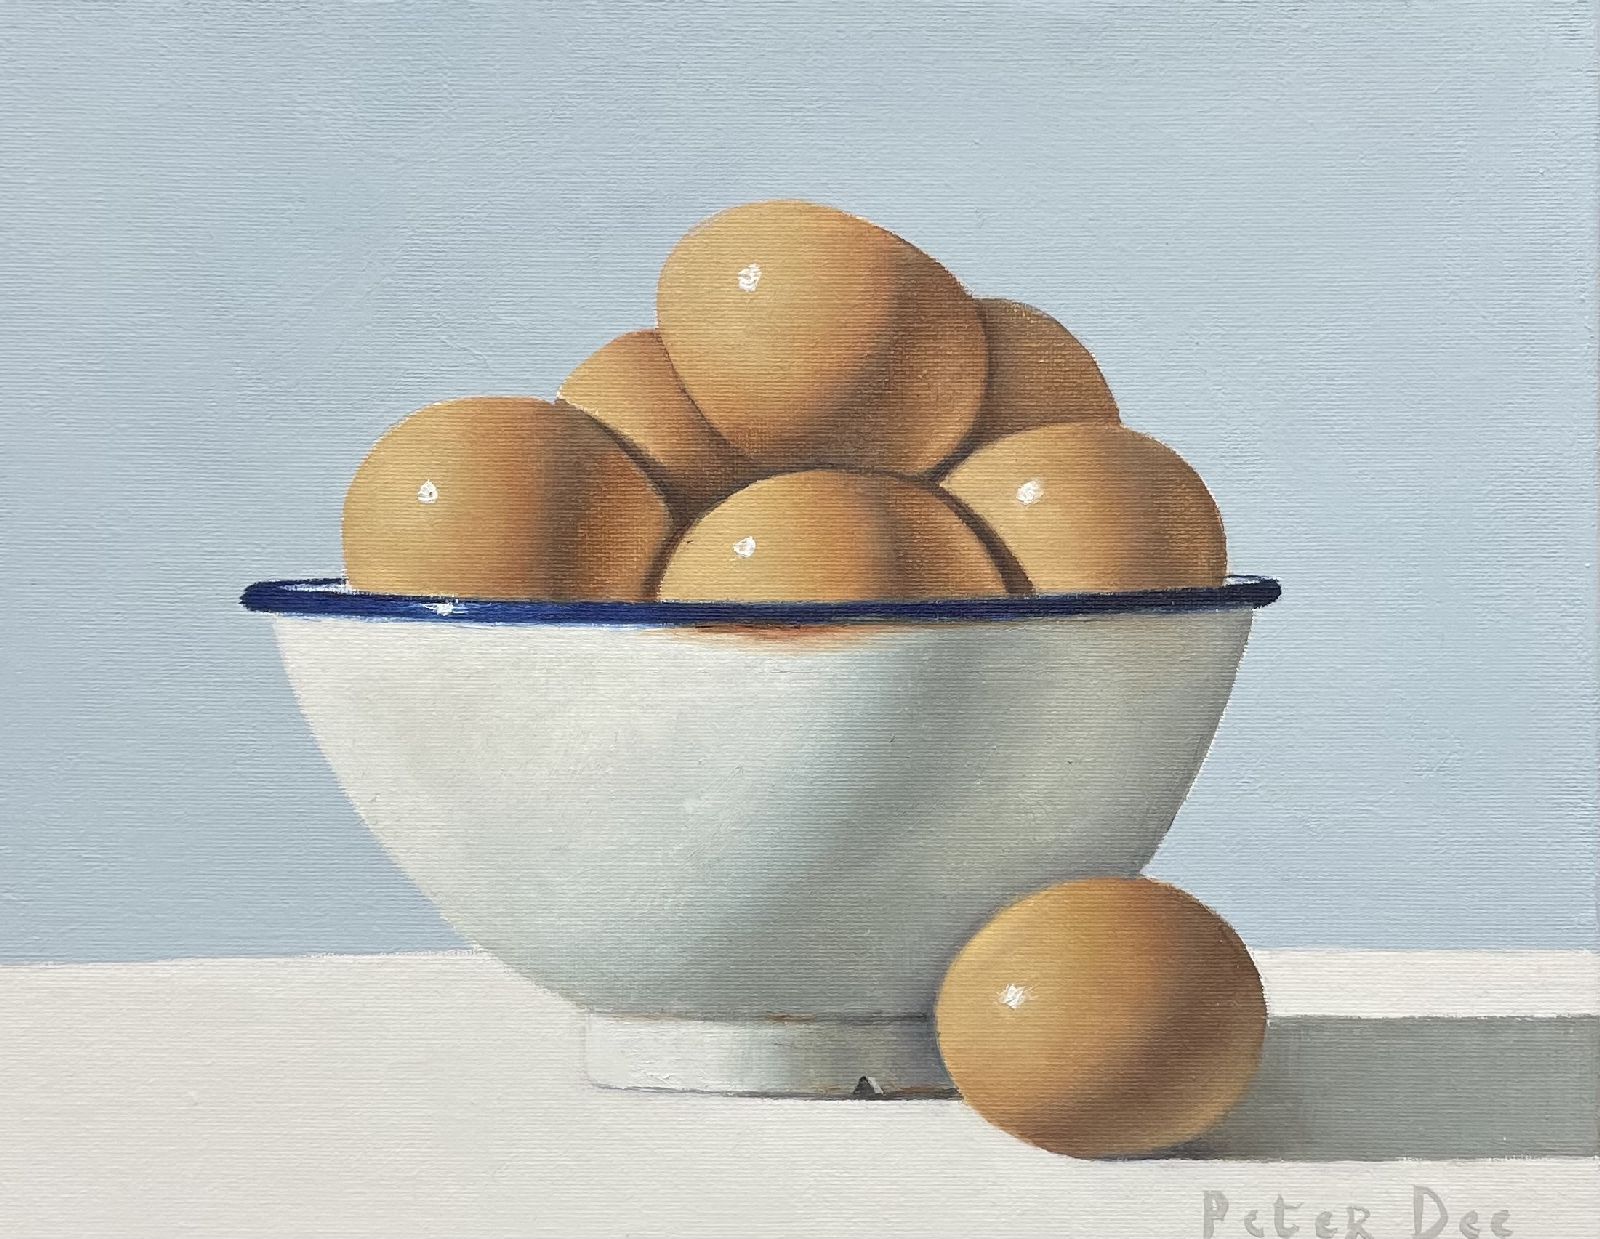 Peter Dee - Eggs in White Bowl